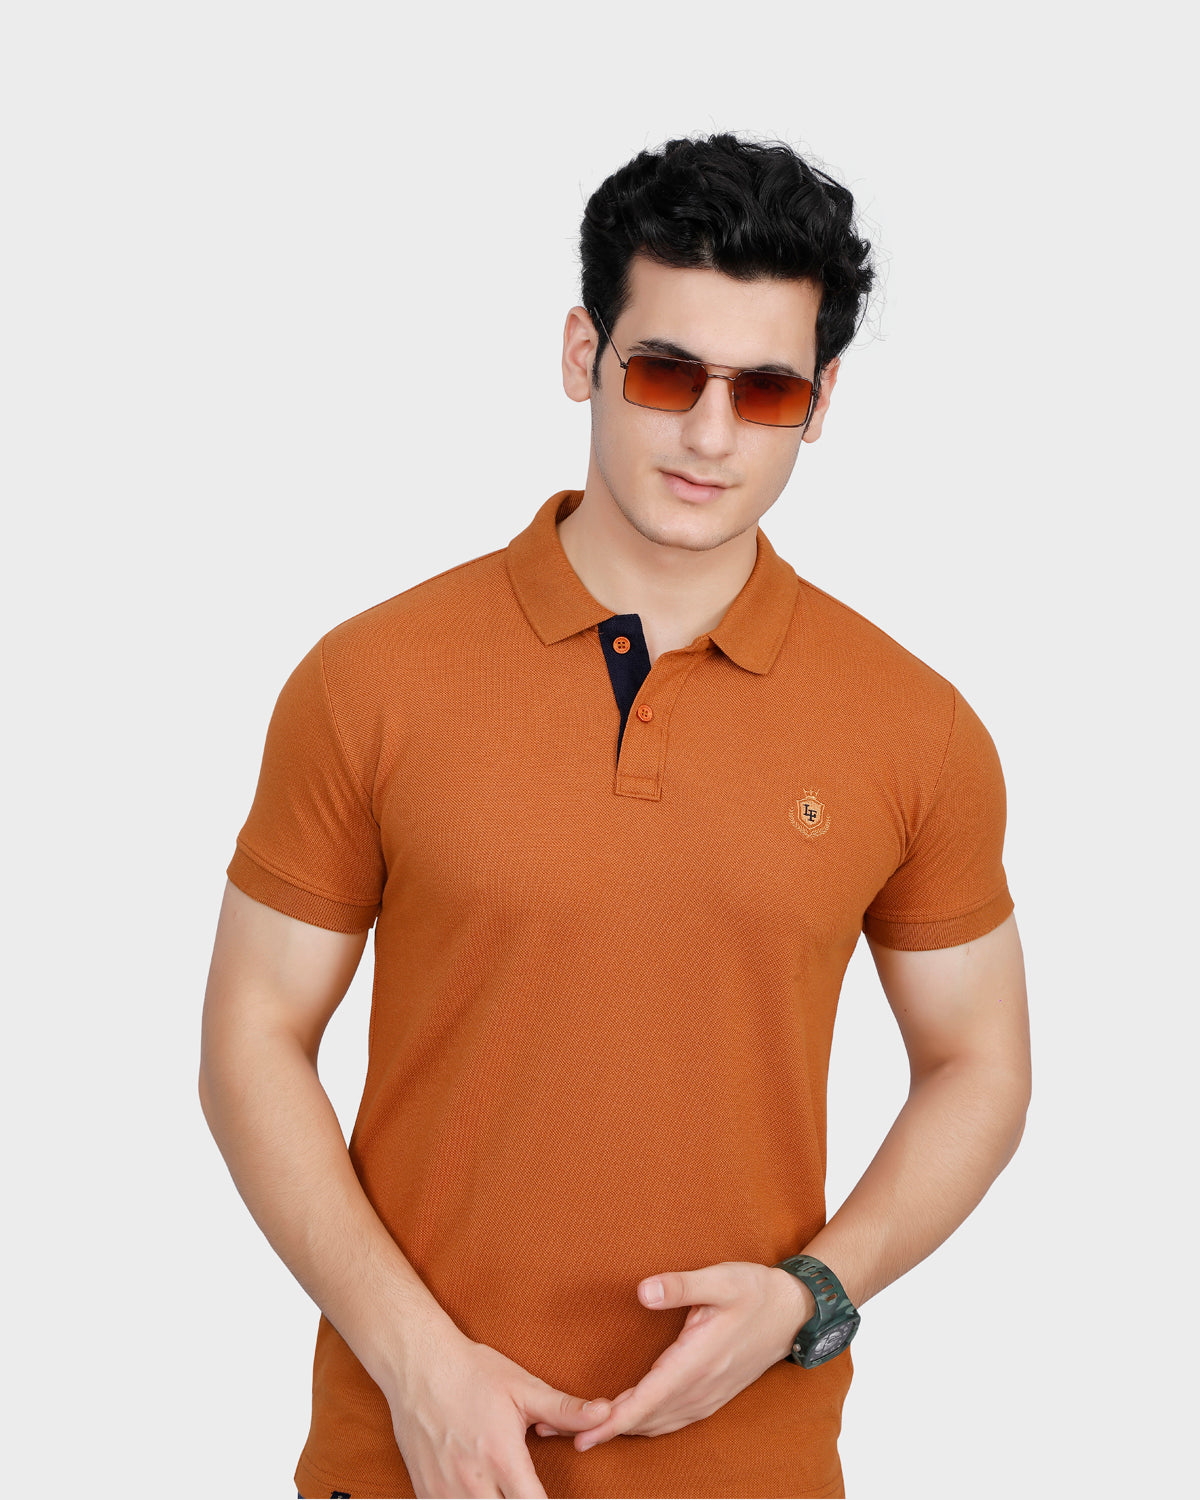 Forensic Logo Solid Classic Polo T-Shirt - Rust